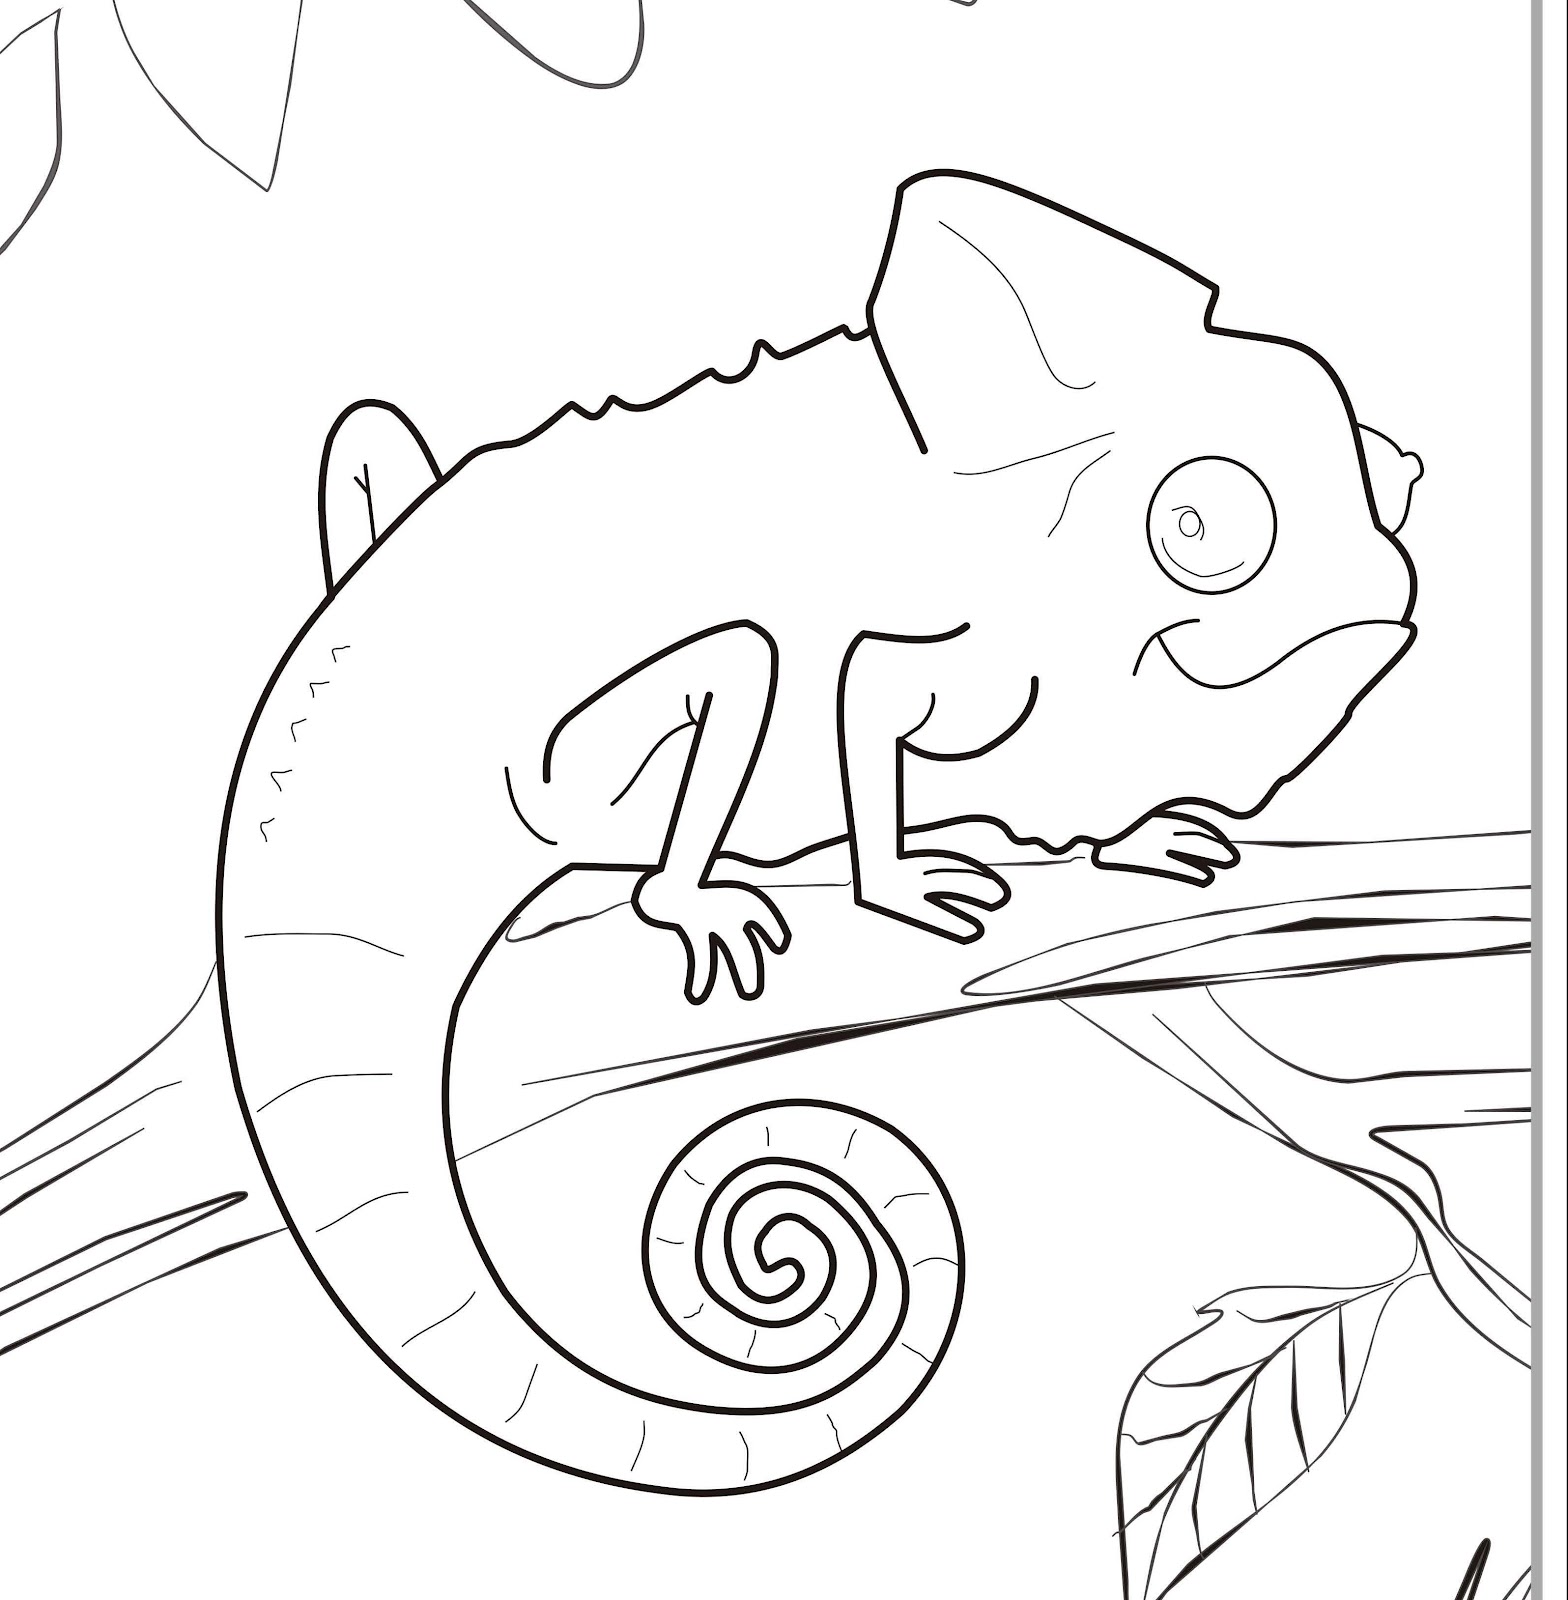 chameleon coloring pages to printable